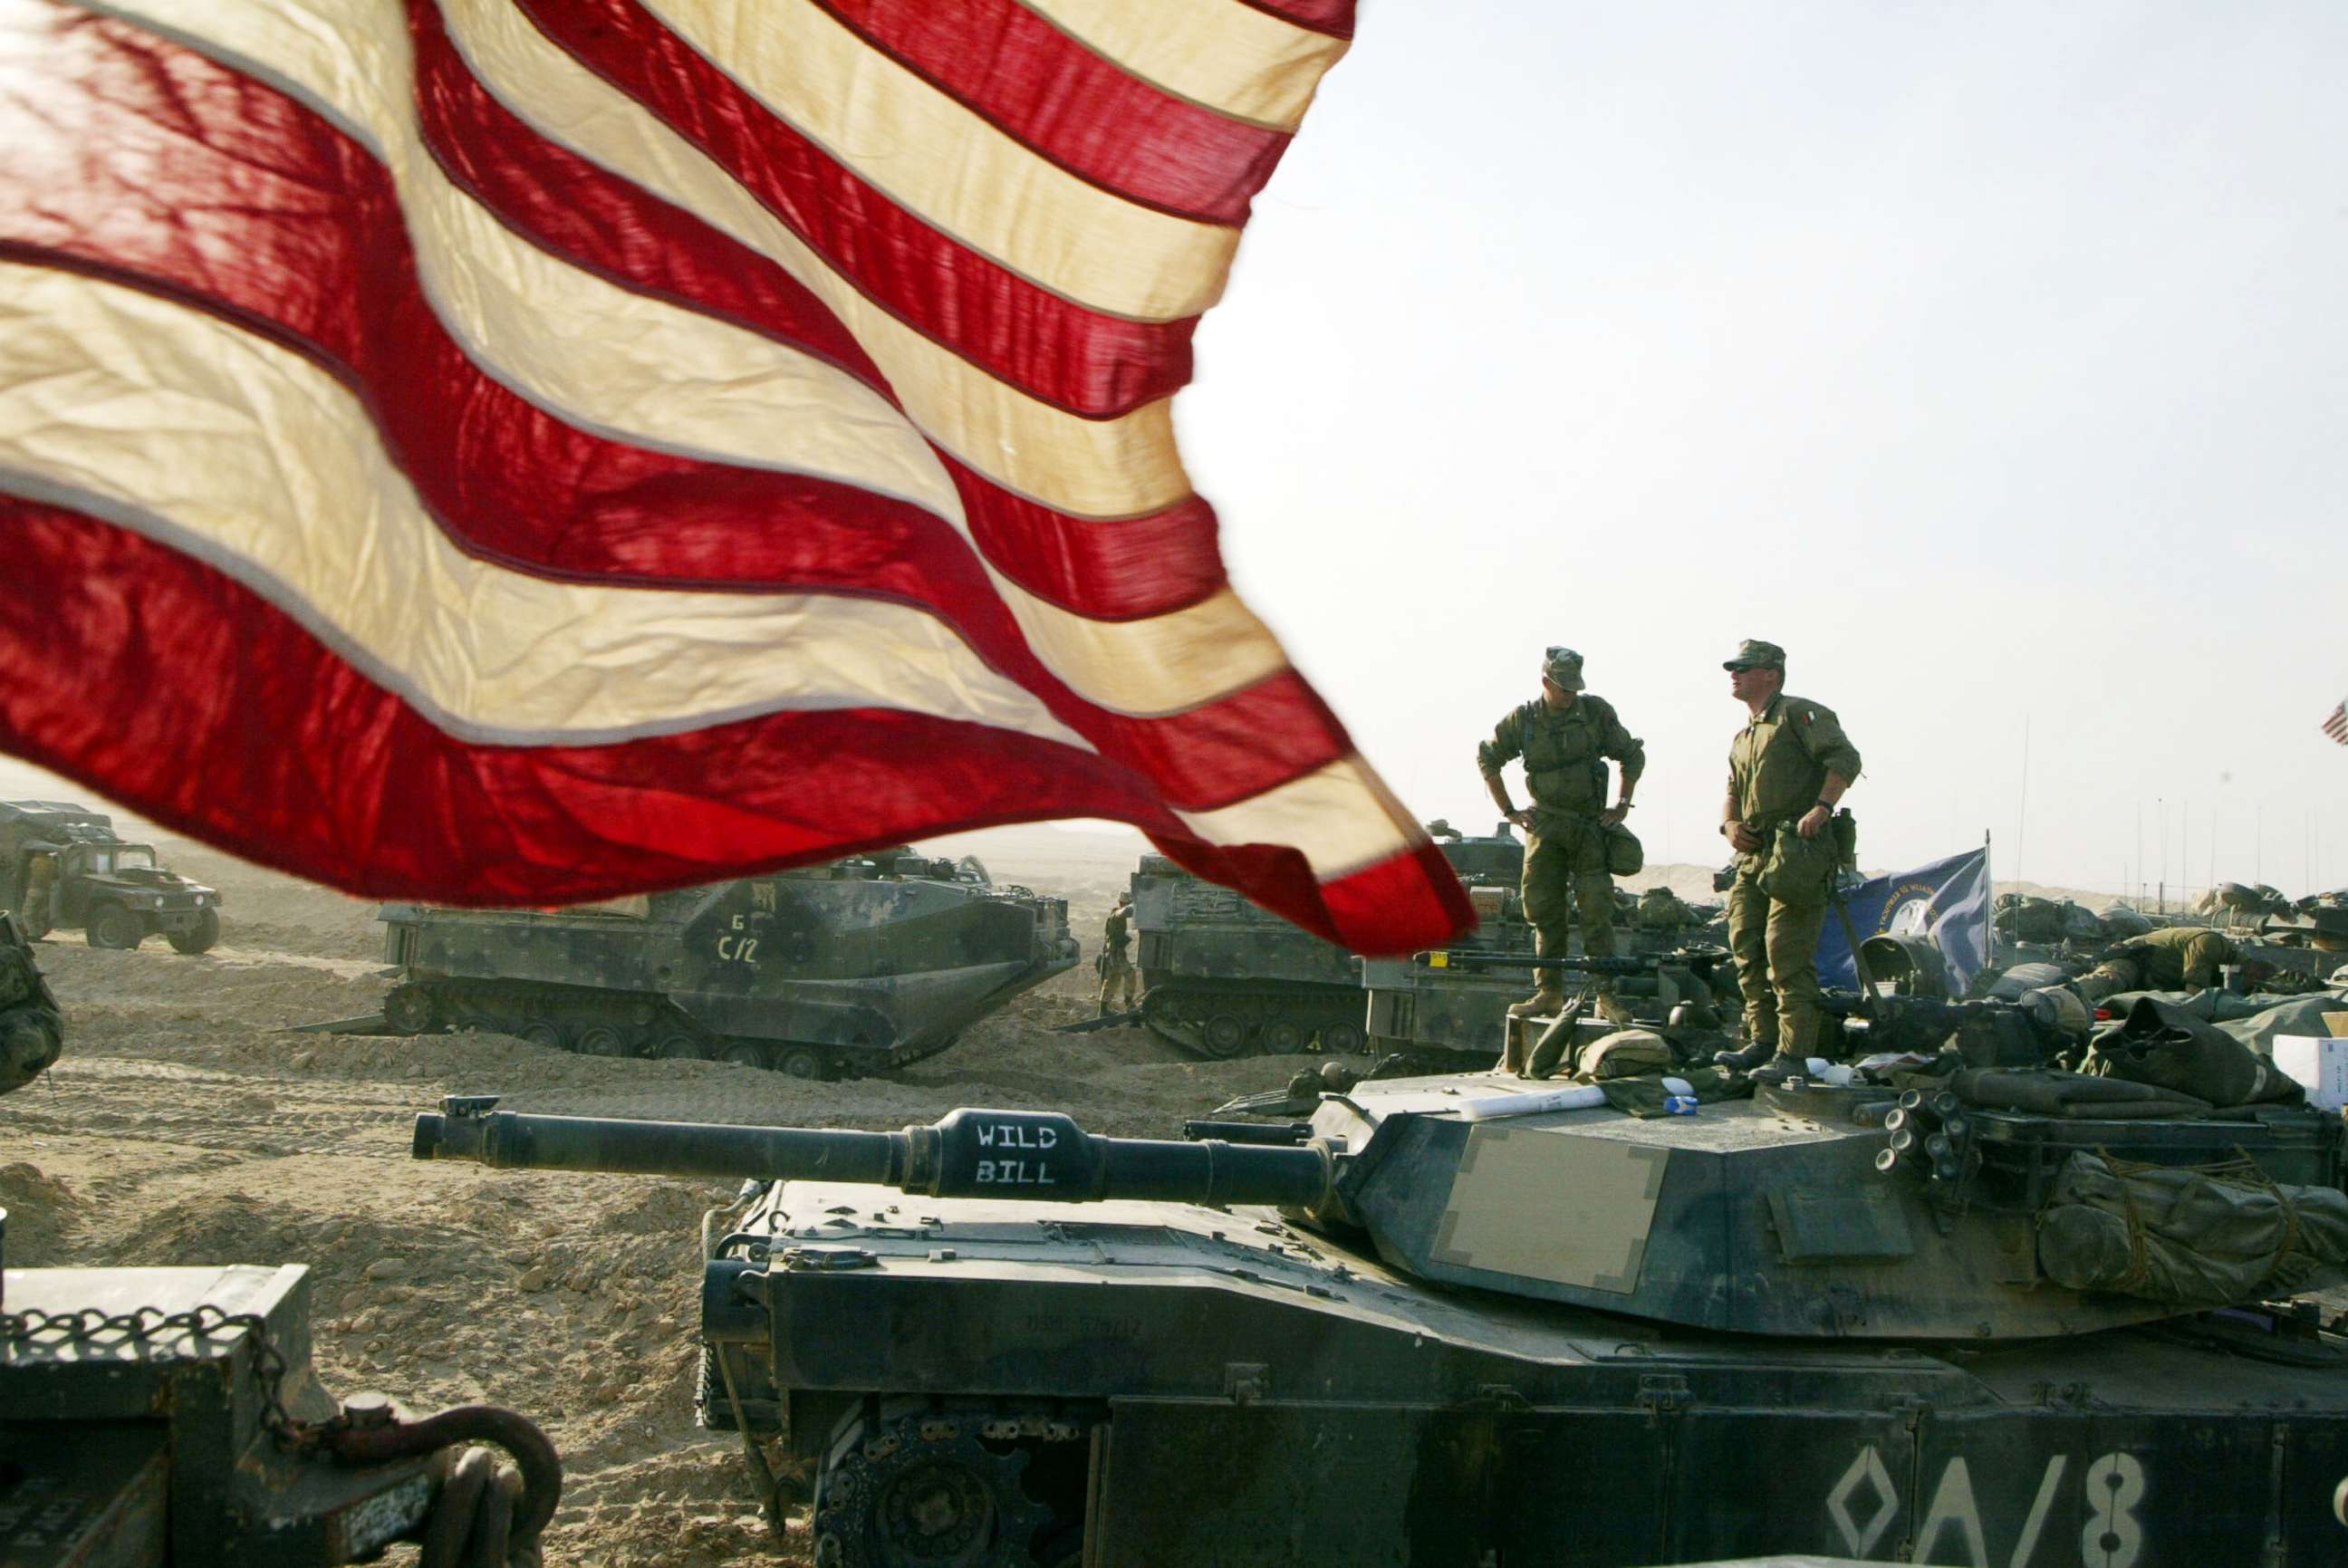 PHOTO: Marines of Task Force Tarawa prepare their vehicles, March 18, 2003, at Camp Shoup, near the Iraqi border, in Kuwait.